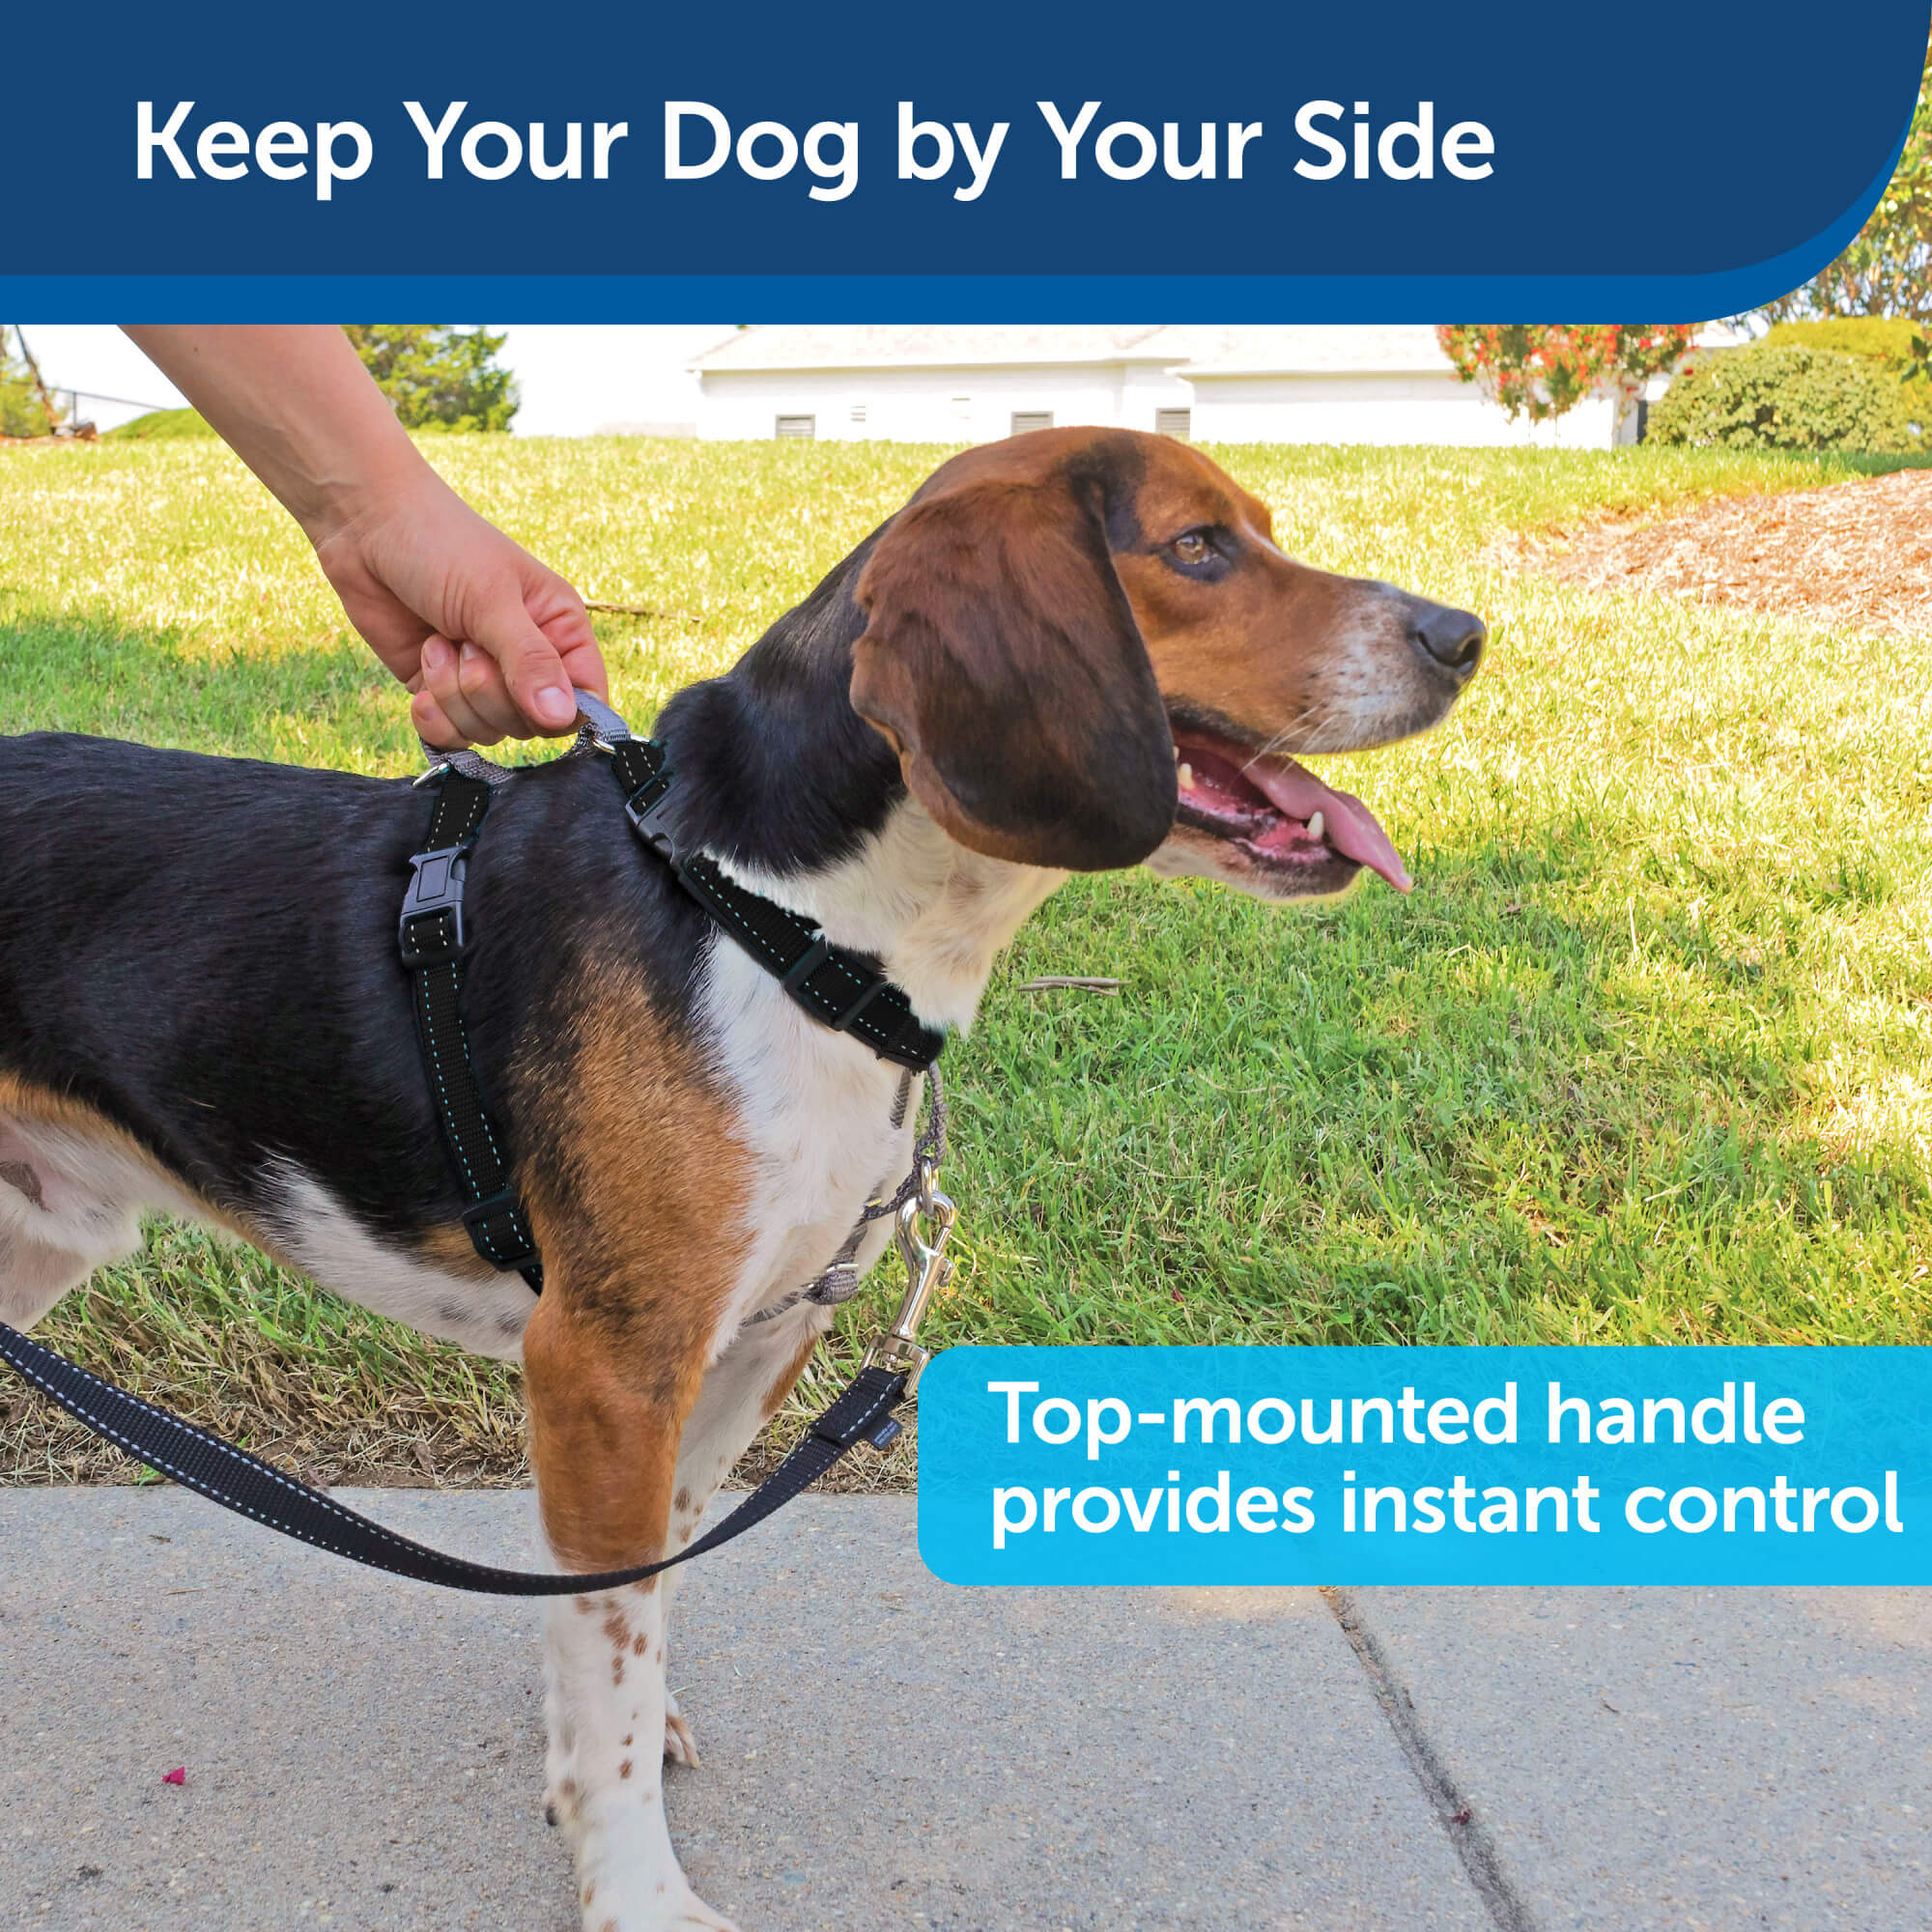 Keep your dog by your side PetSafe